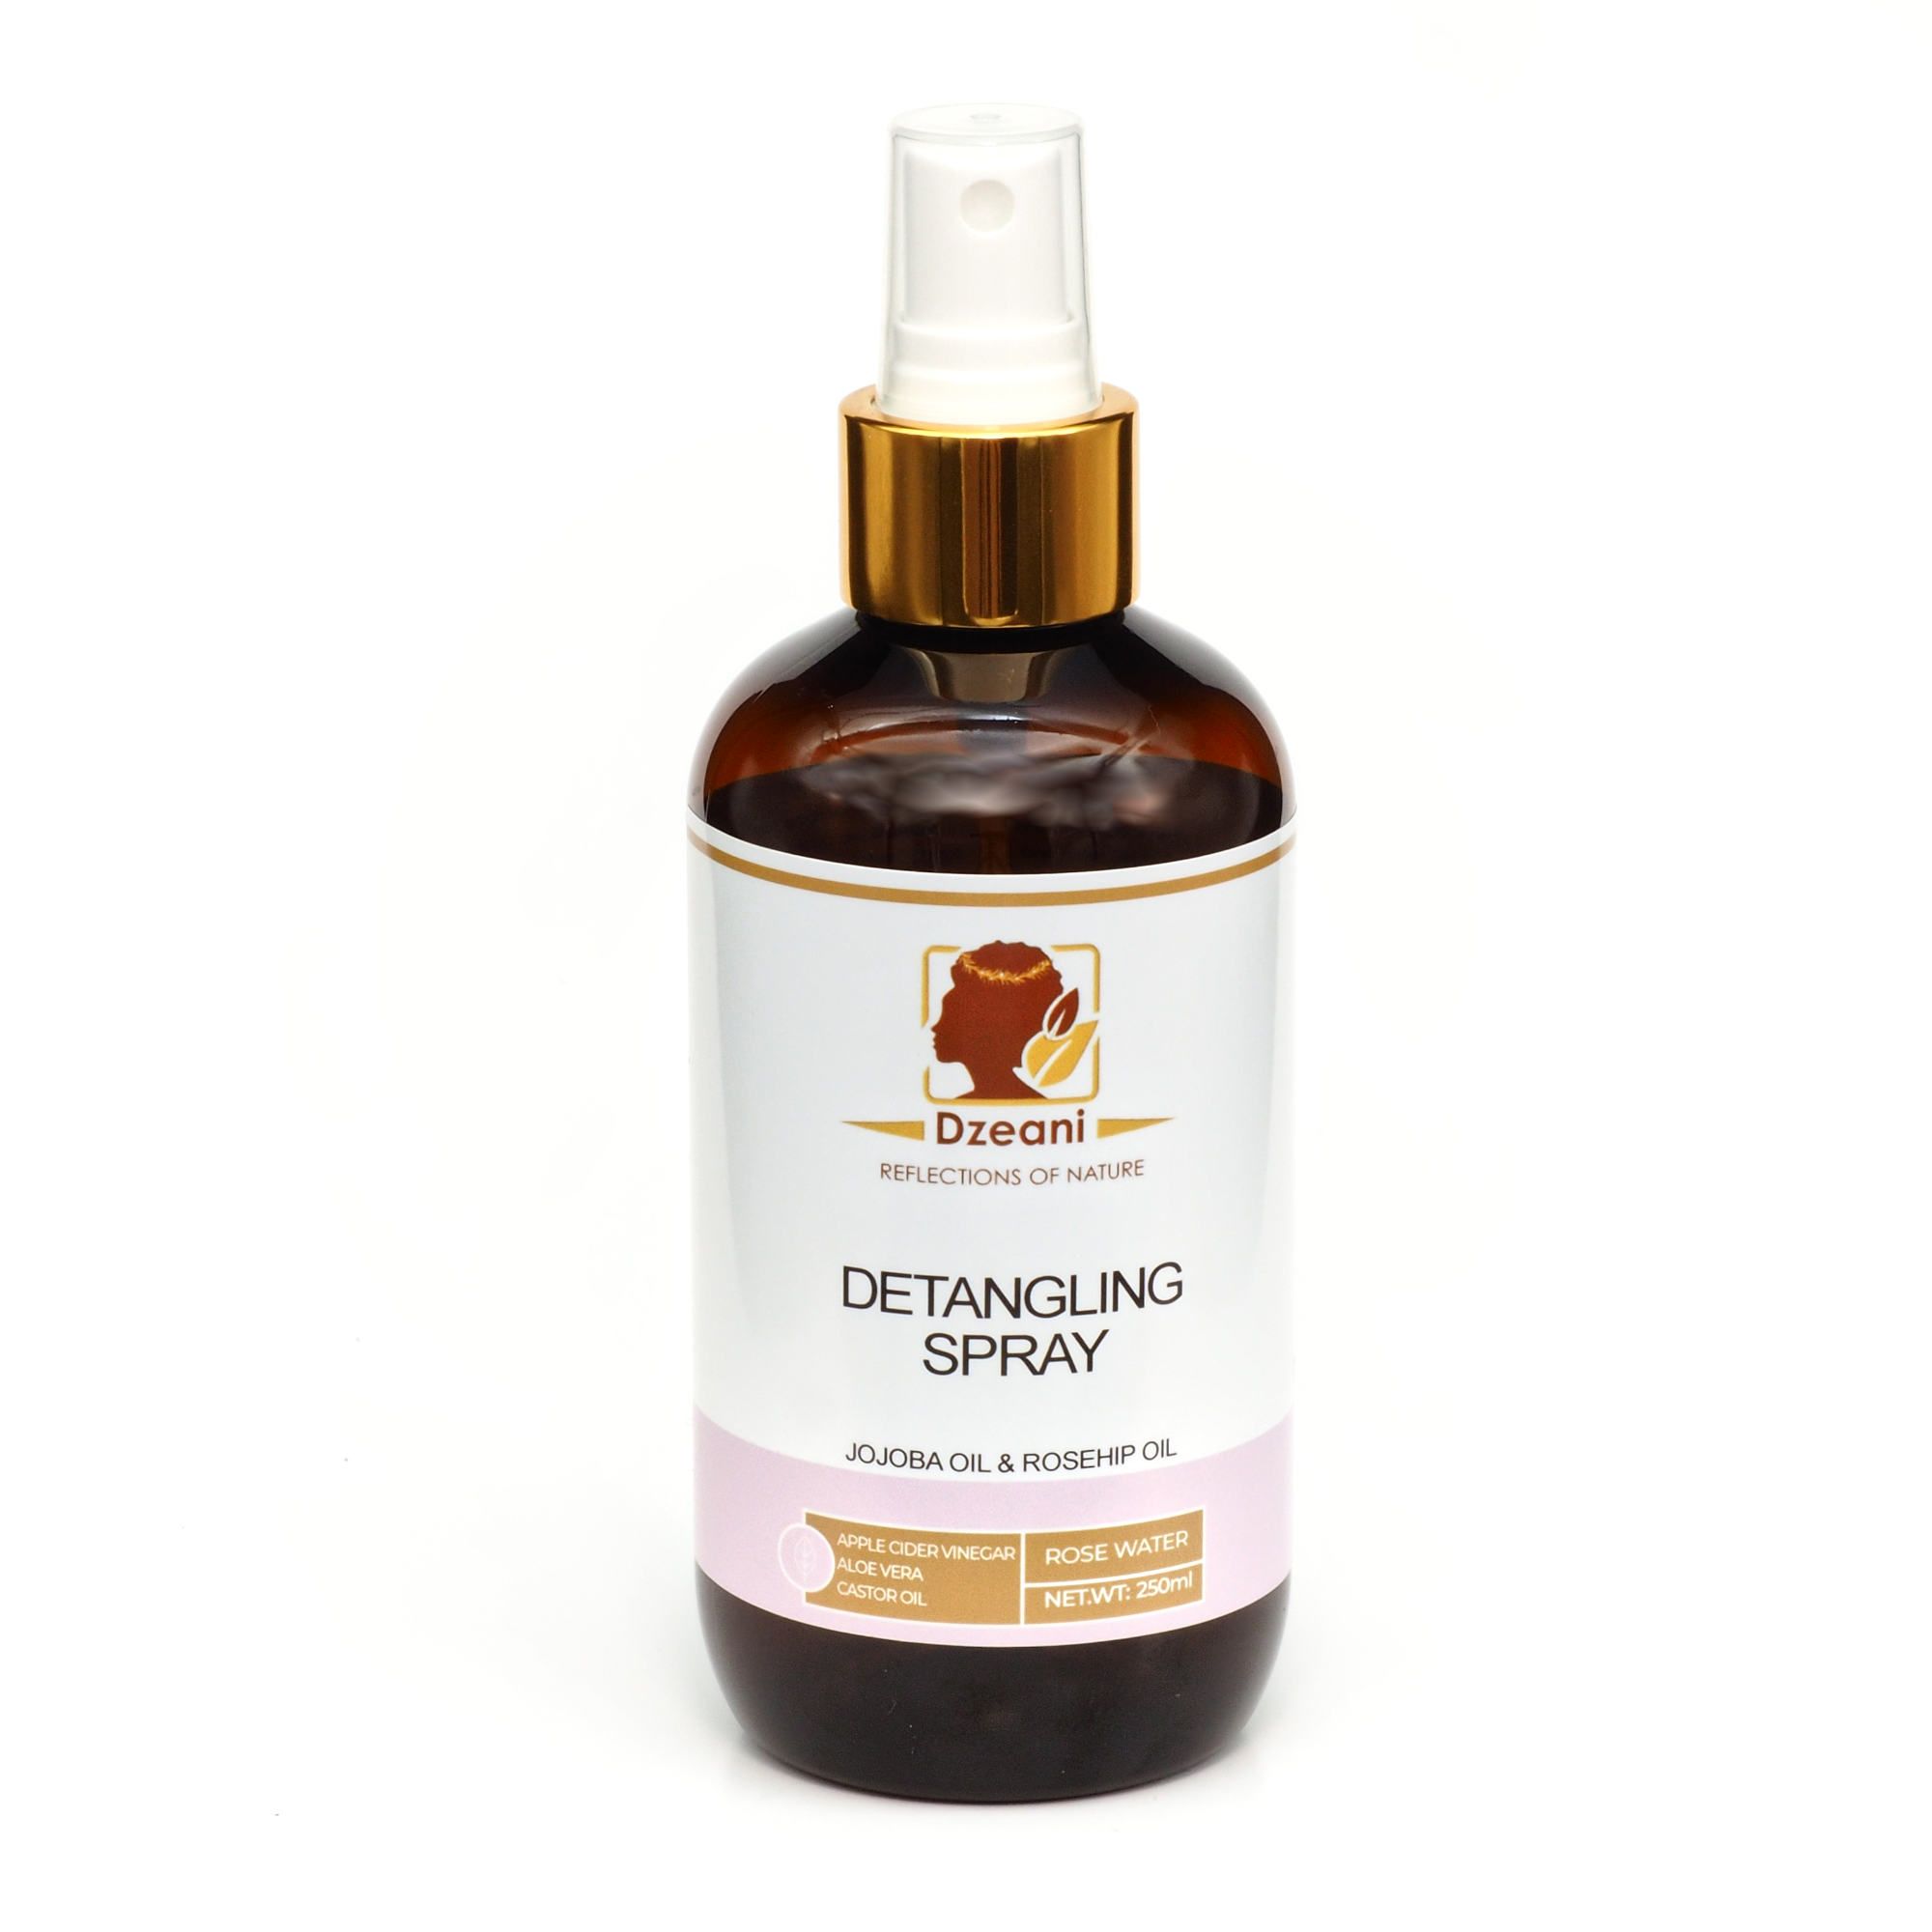 Dzeani Detangling  Spray is an efficient detangling mist designed to smooth, soften and prevent moisture loss, preserving your hair from structural wear and tear